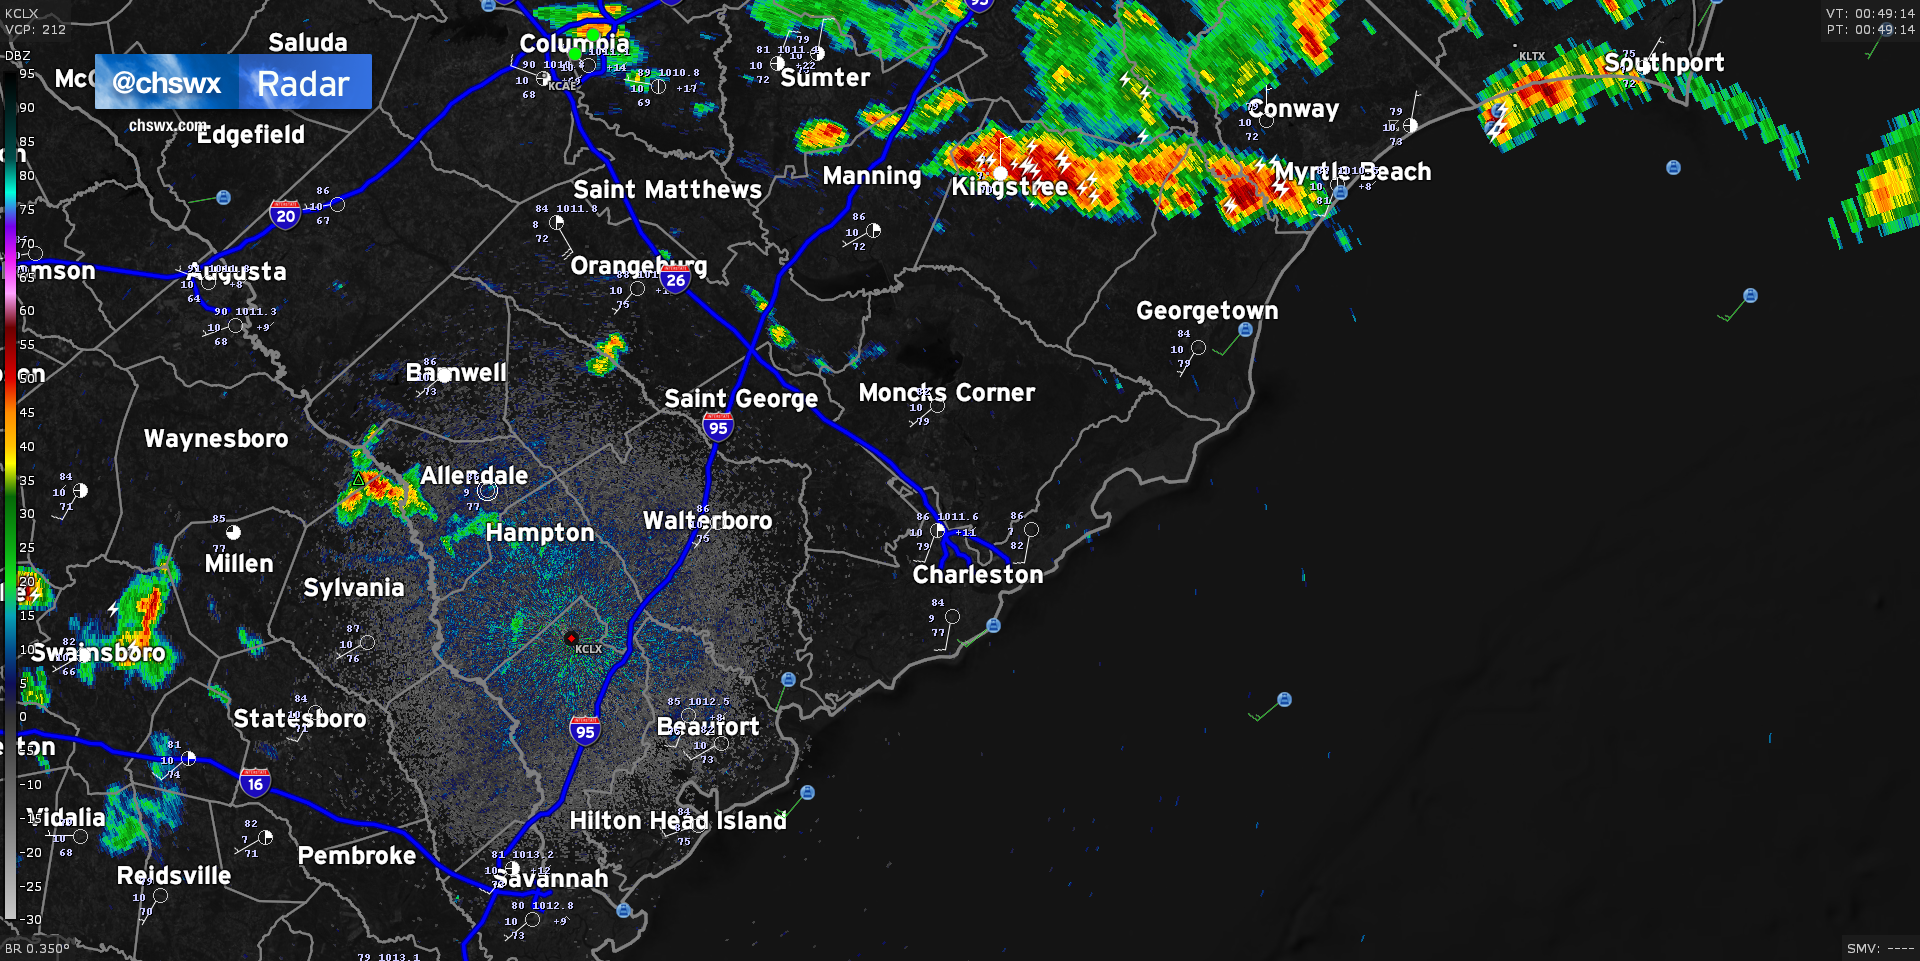 Radar snapshot at 8:49 PM on August 1, 2021, depicting thunderstorms developing from Kingstree to Myrtle Beach with scattered showers and thunderstorms elsewhere across South Carolina and Southeast Georgia.